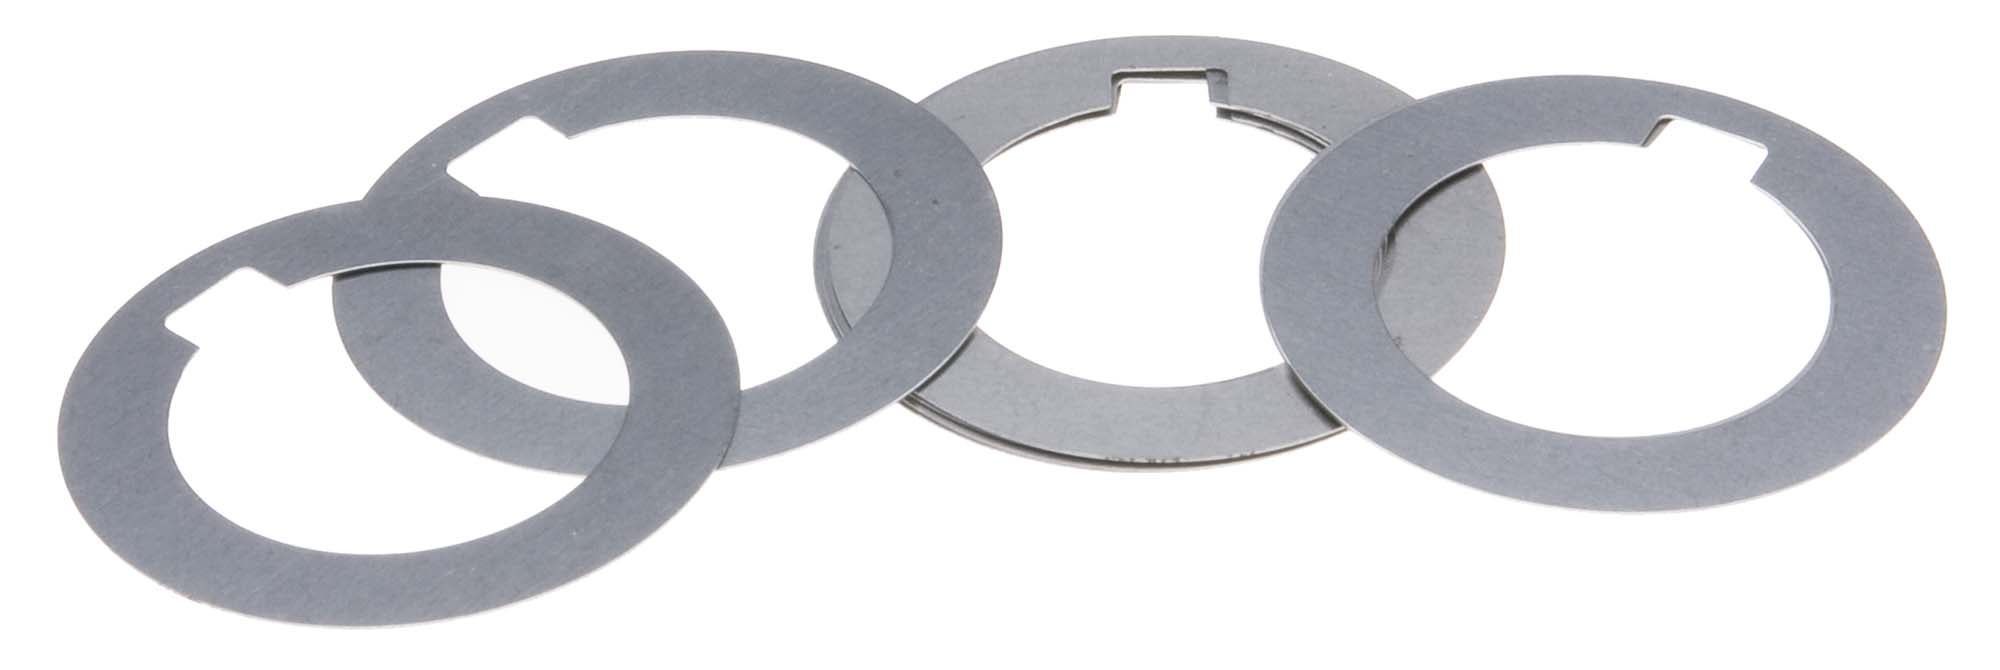 .010" Arbor Spacer Shims 1" ID-10 pc